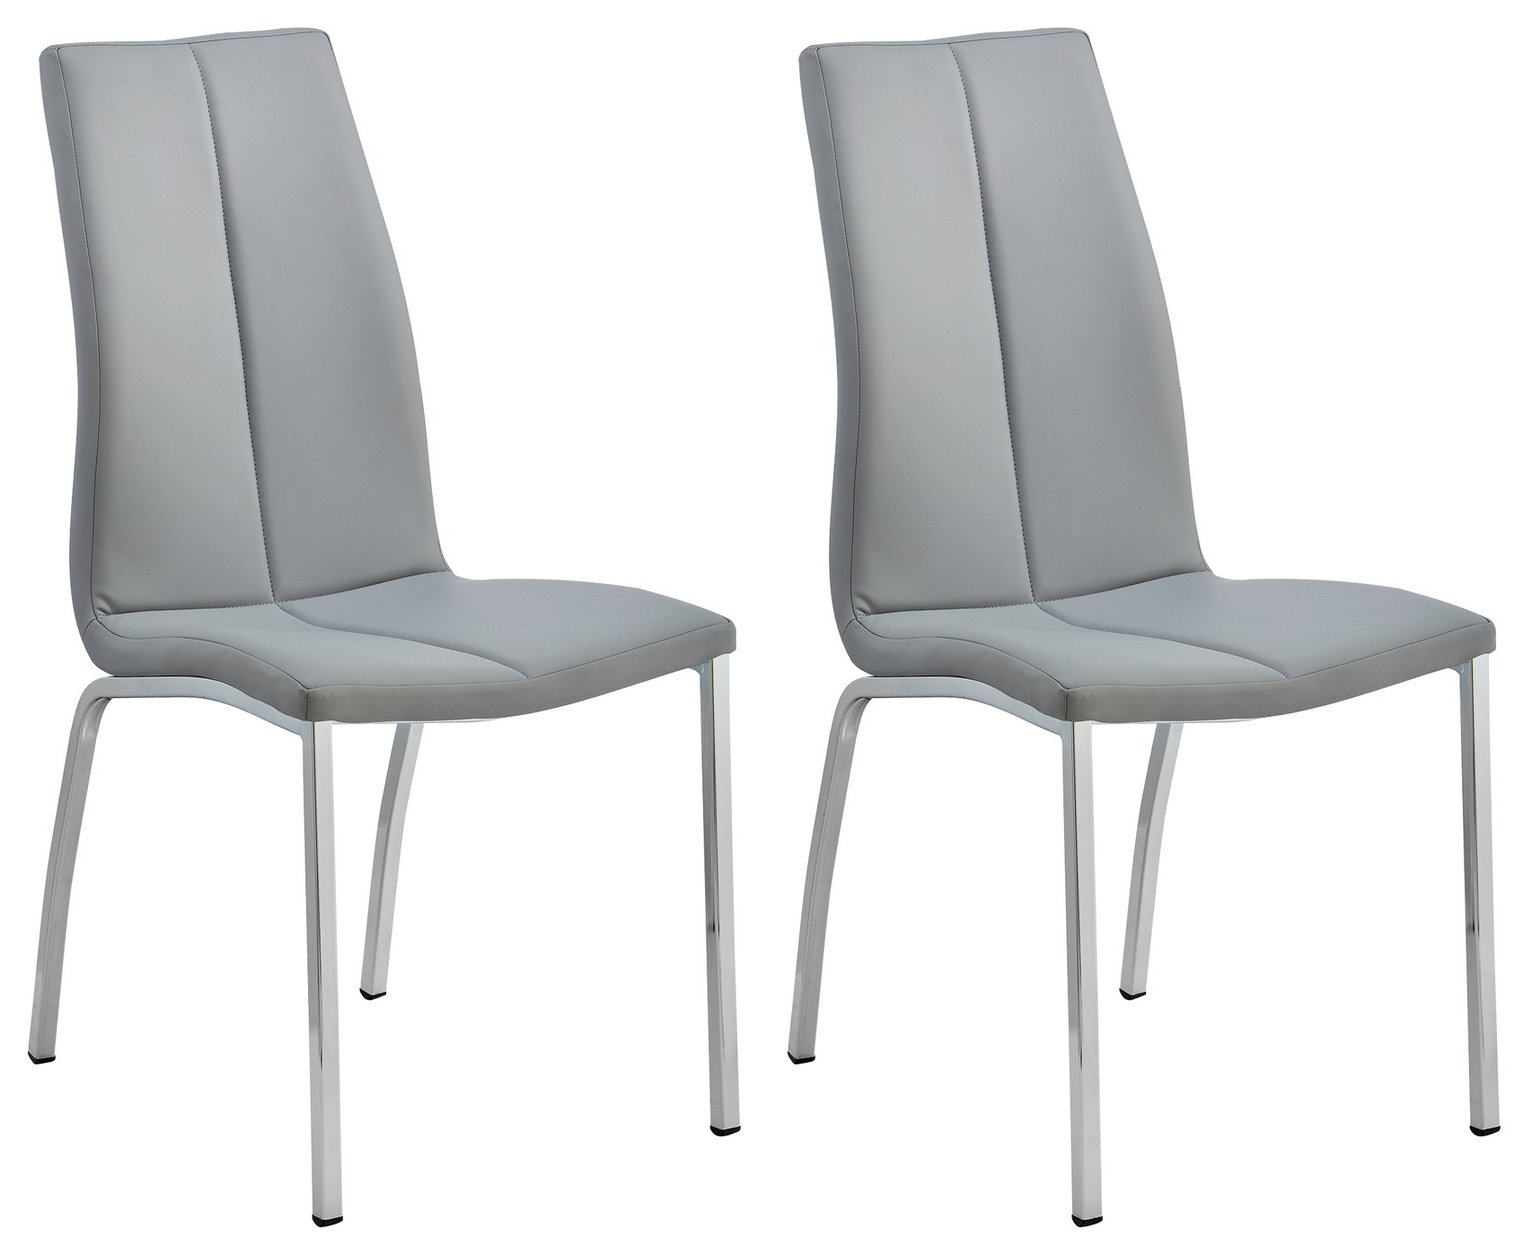 Argos Home Milo Pair of Curve Back Chairs - Grey